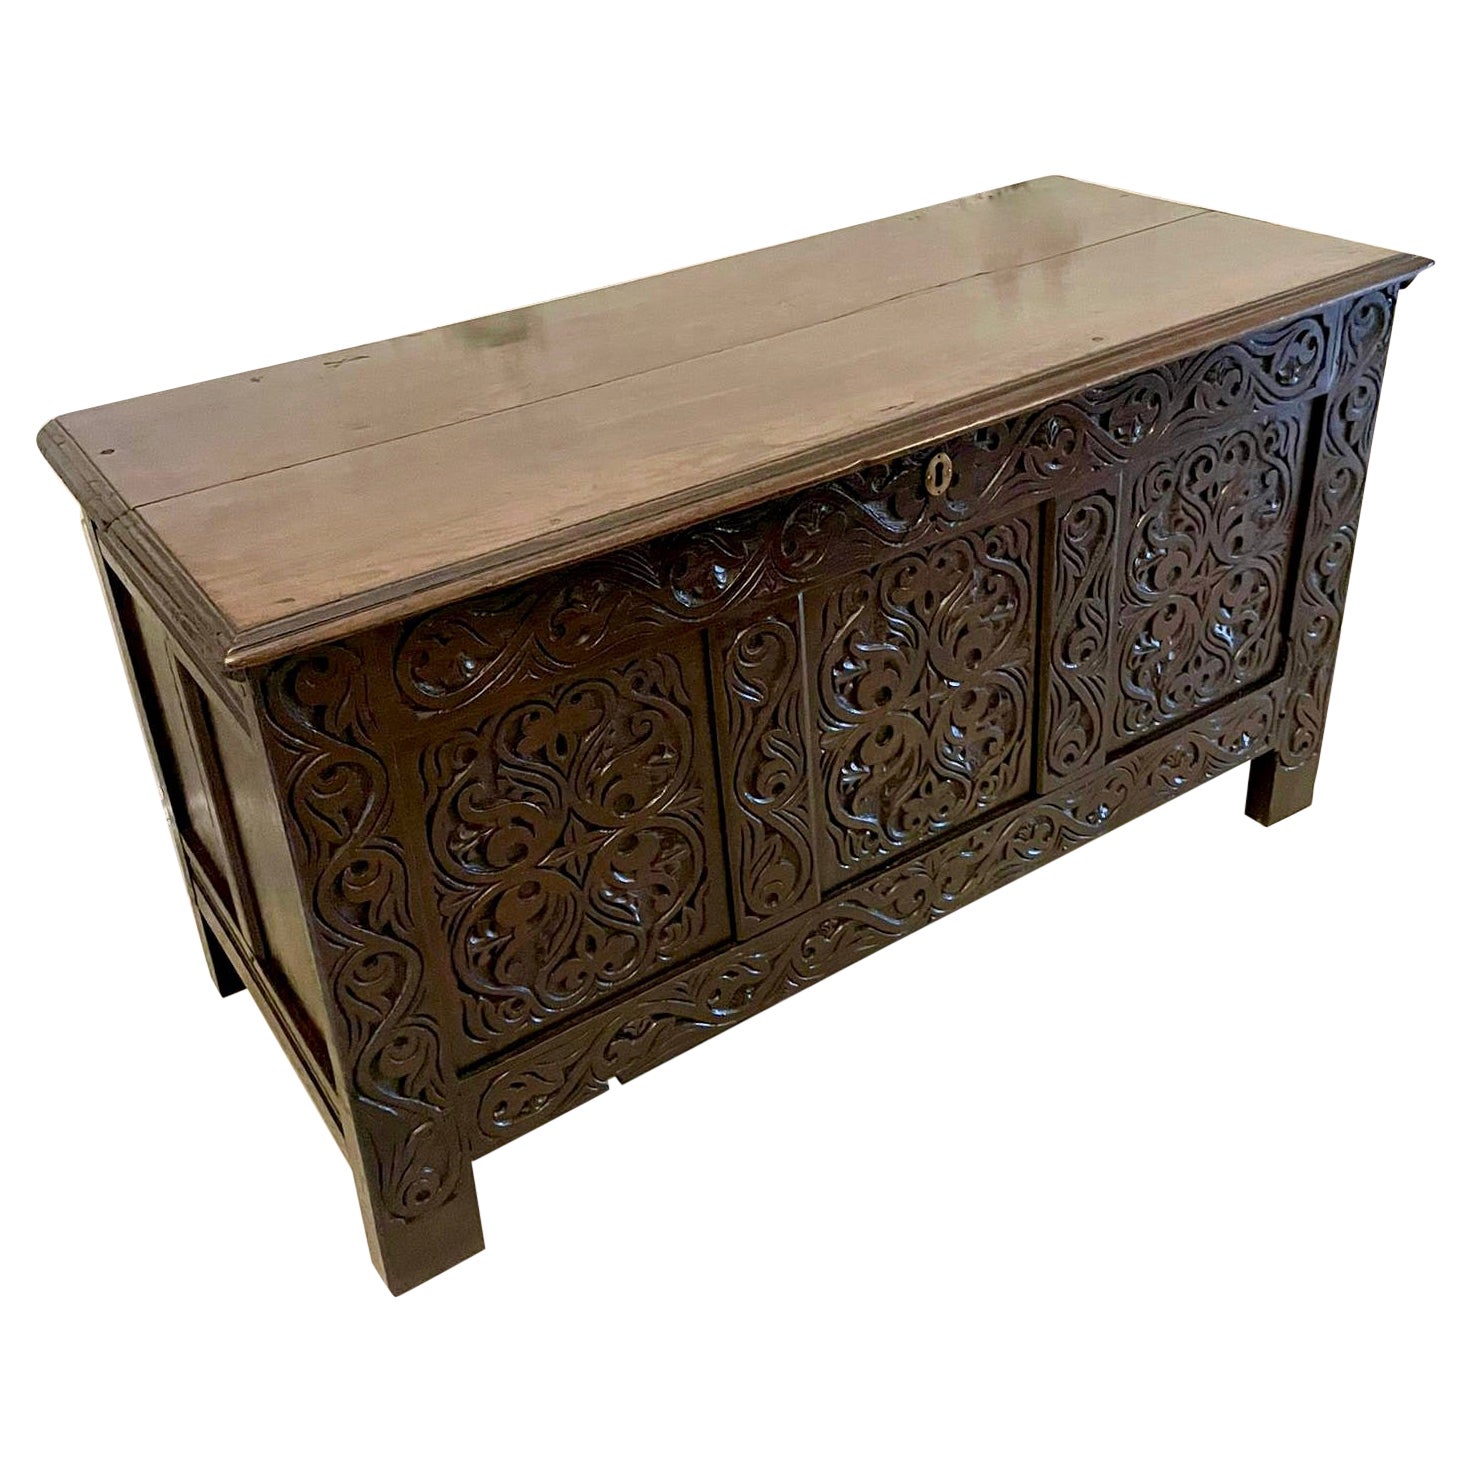 Antique Early 18th Century Carved Oak Coffer/Chest For Sale